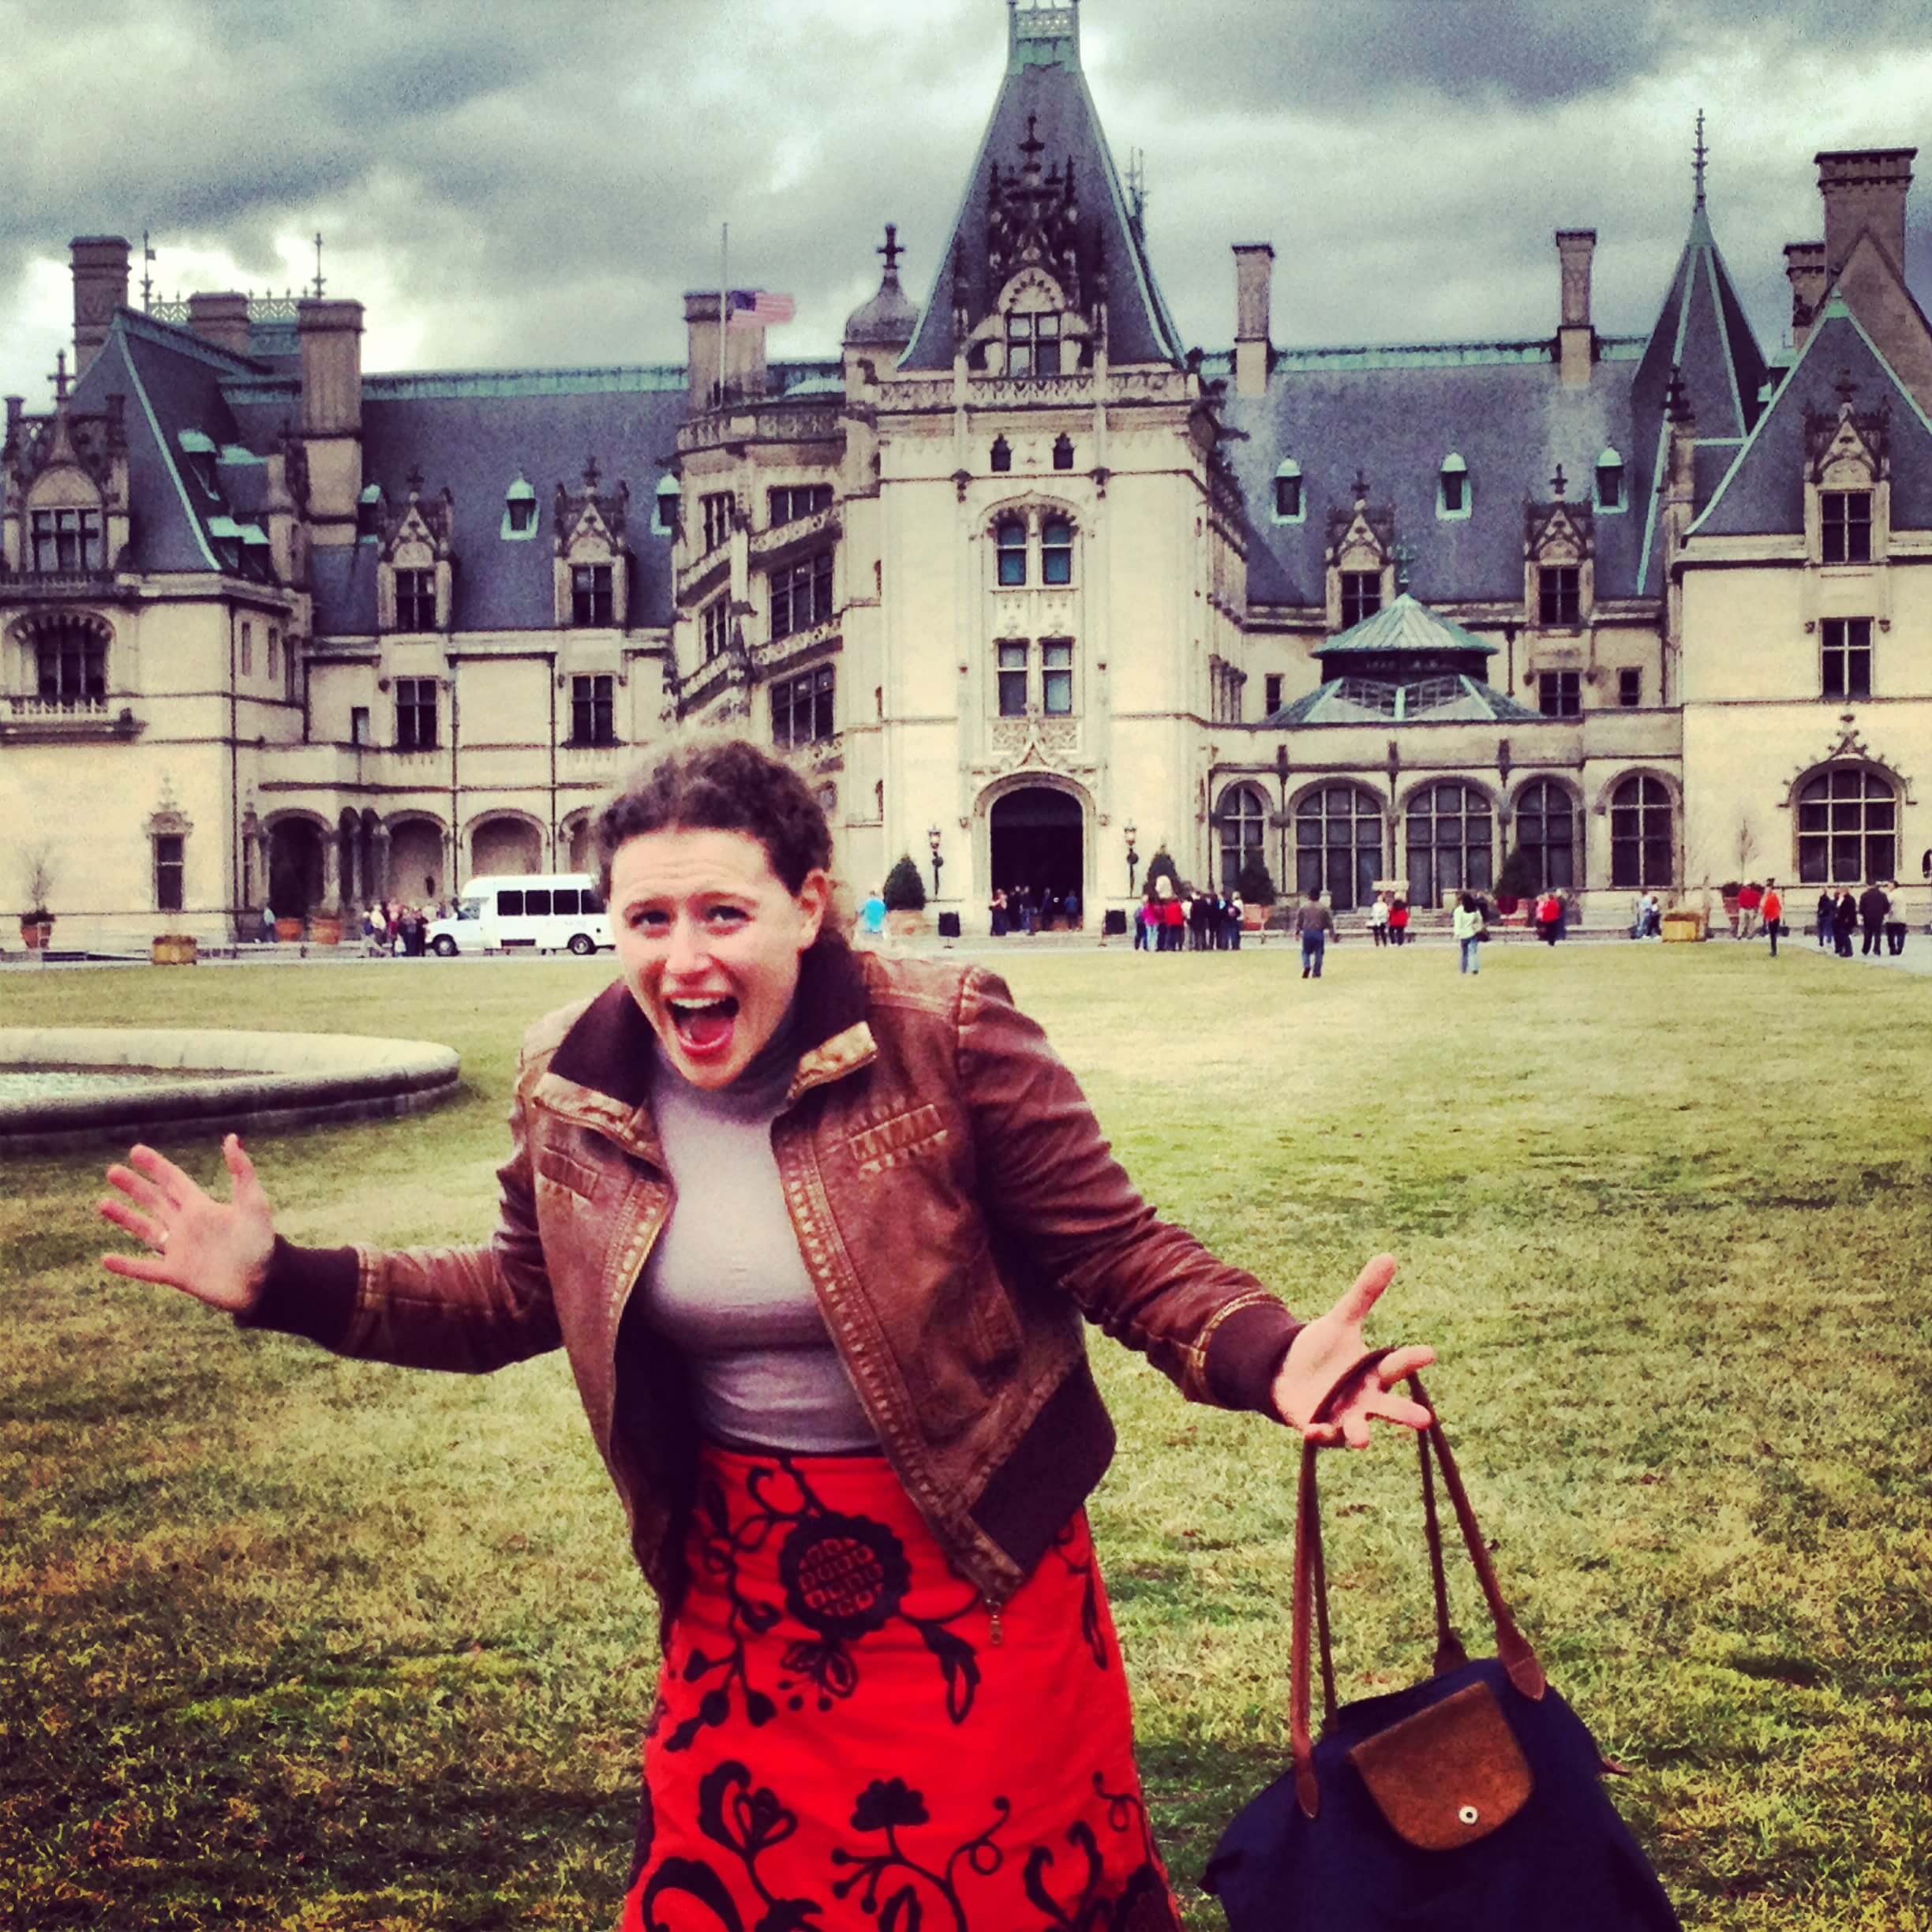 My excitement for Asheville (and the Biltmore) knows no bounds!